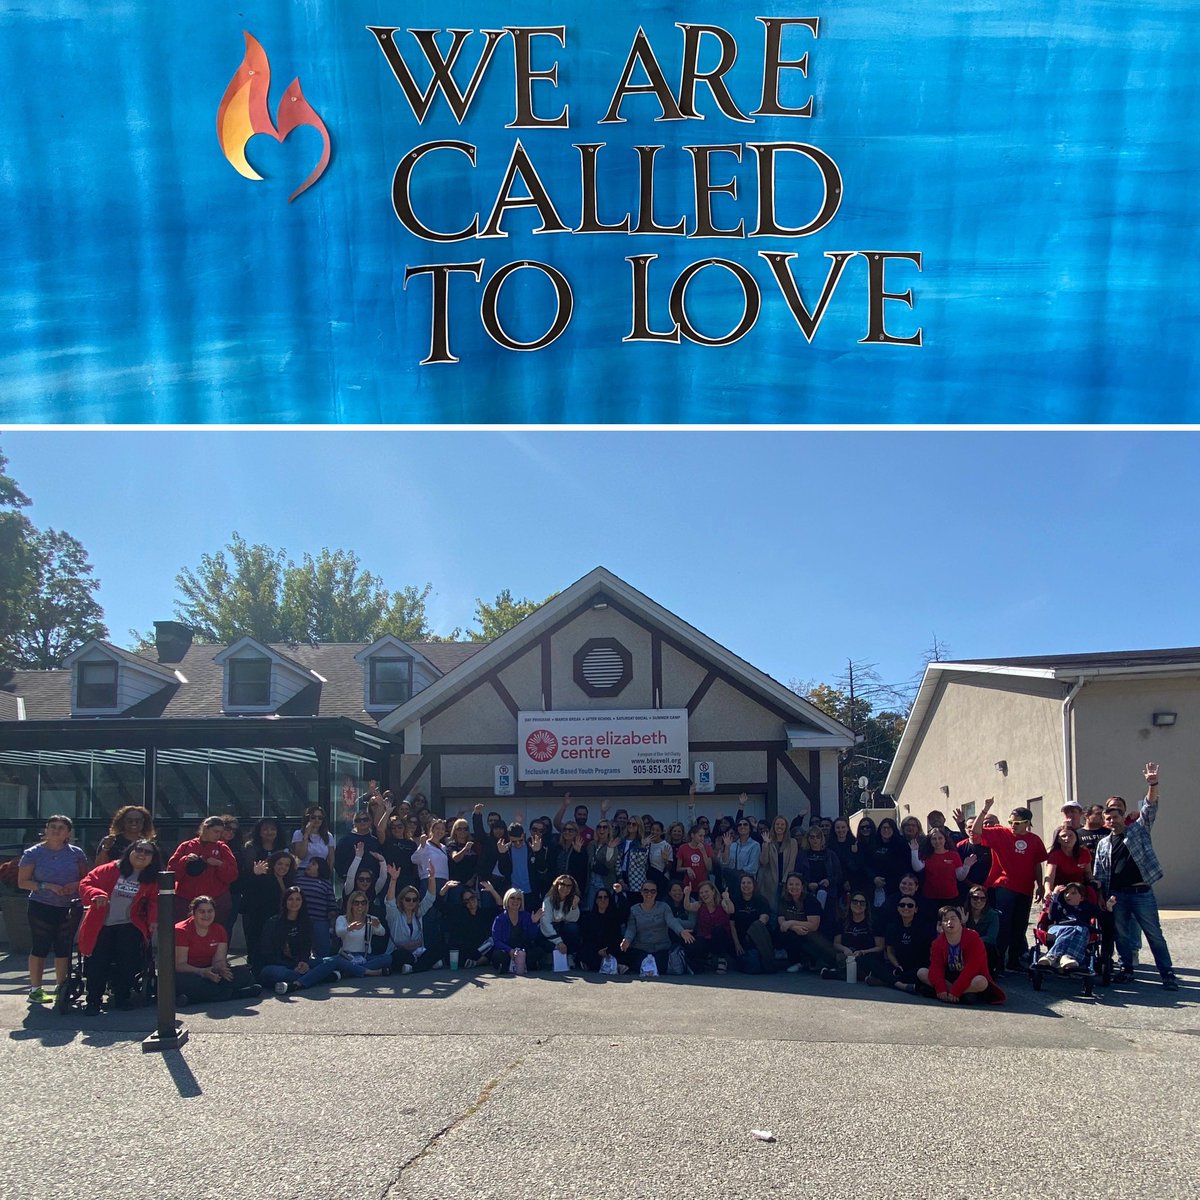 @LOC_YCDSB Faith Day 2023 was filled with so much LOVE ❤️. Thank you SEC @BlueVeil for welcoming us and @smy_nobleton for sharing beautiful day of prayer and reflection.